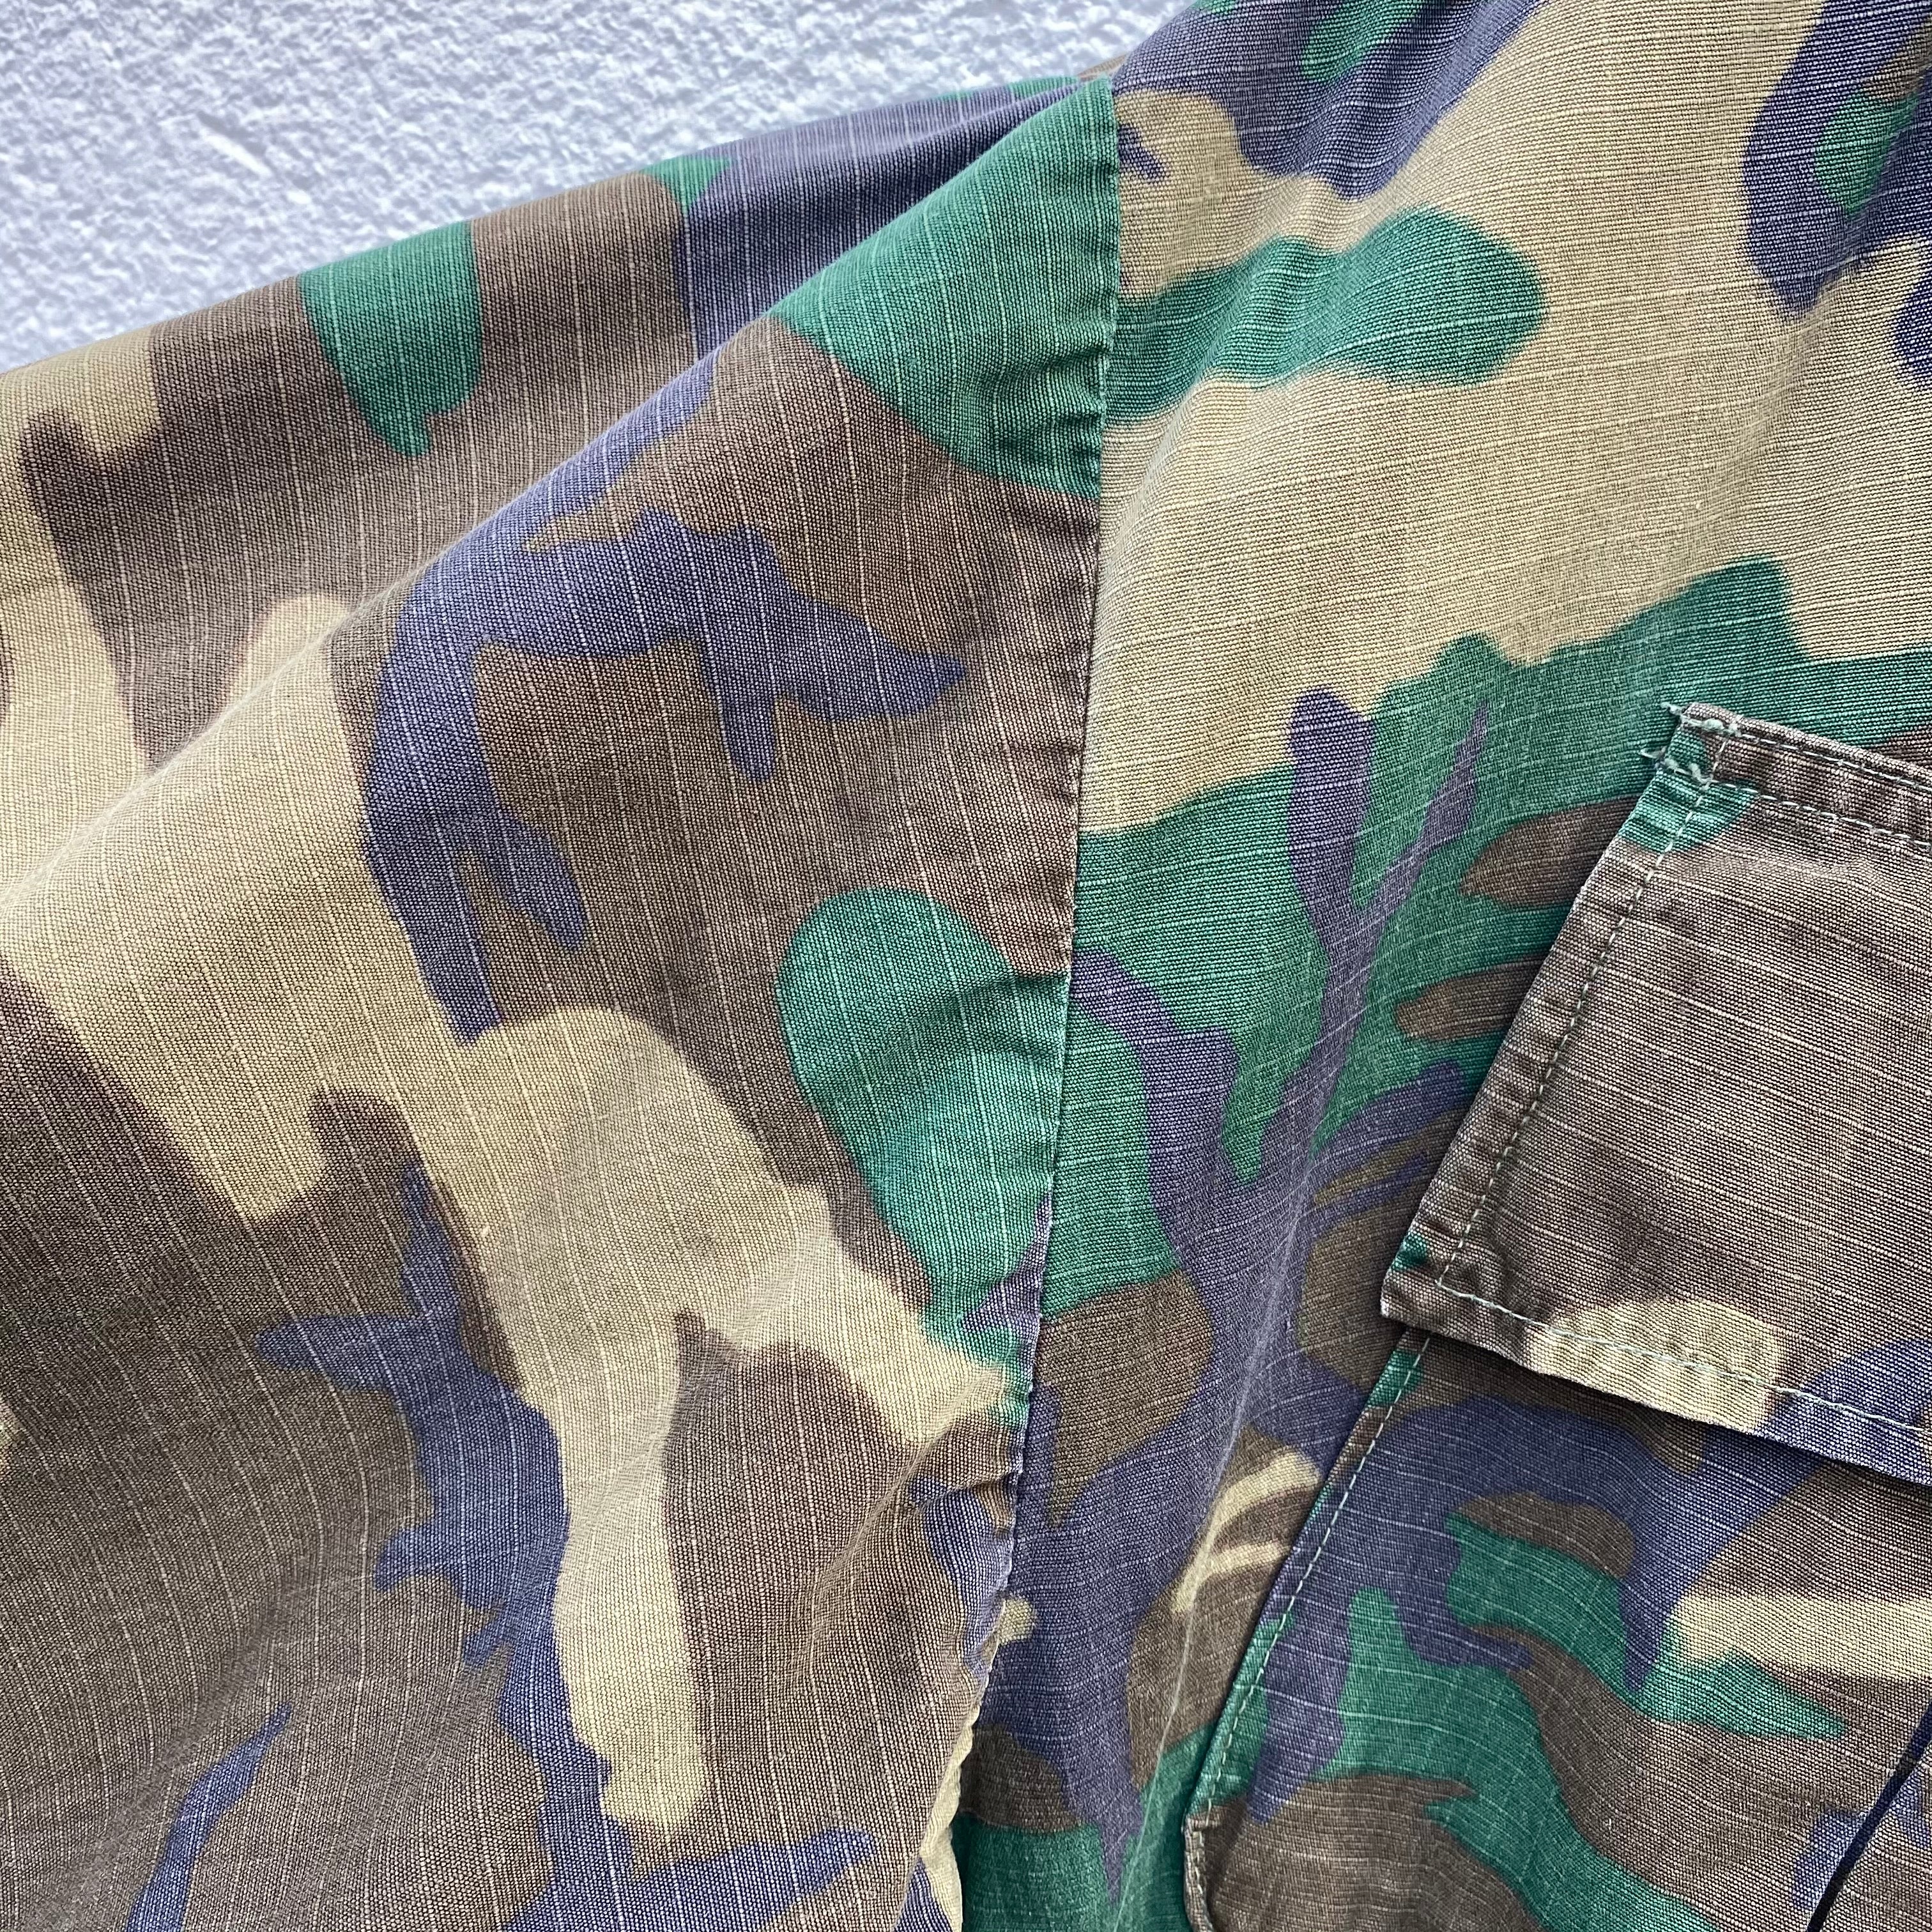 [ ONLY ONE ! ] US ARMED FORCES '70 JUNGLE FATIGUE SHIRT / Mr.Clean Select